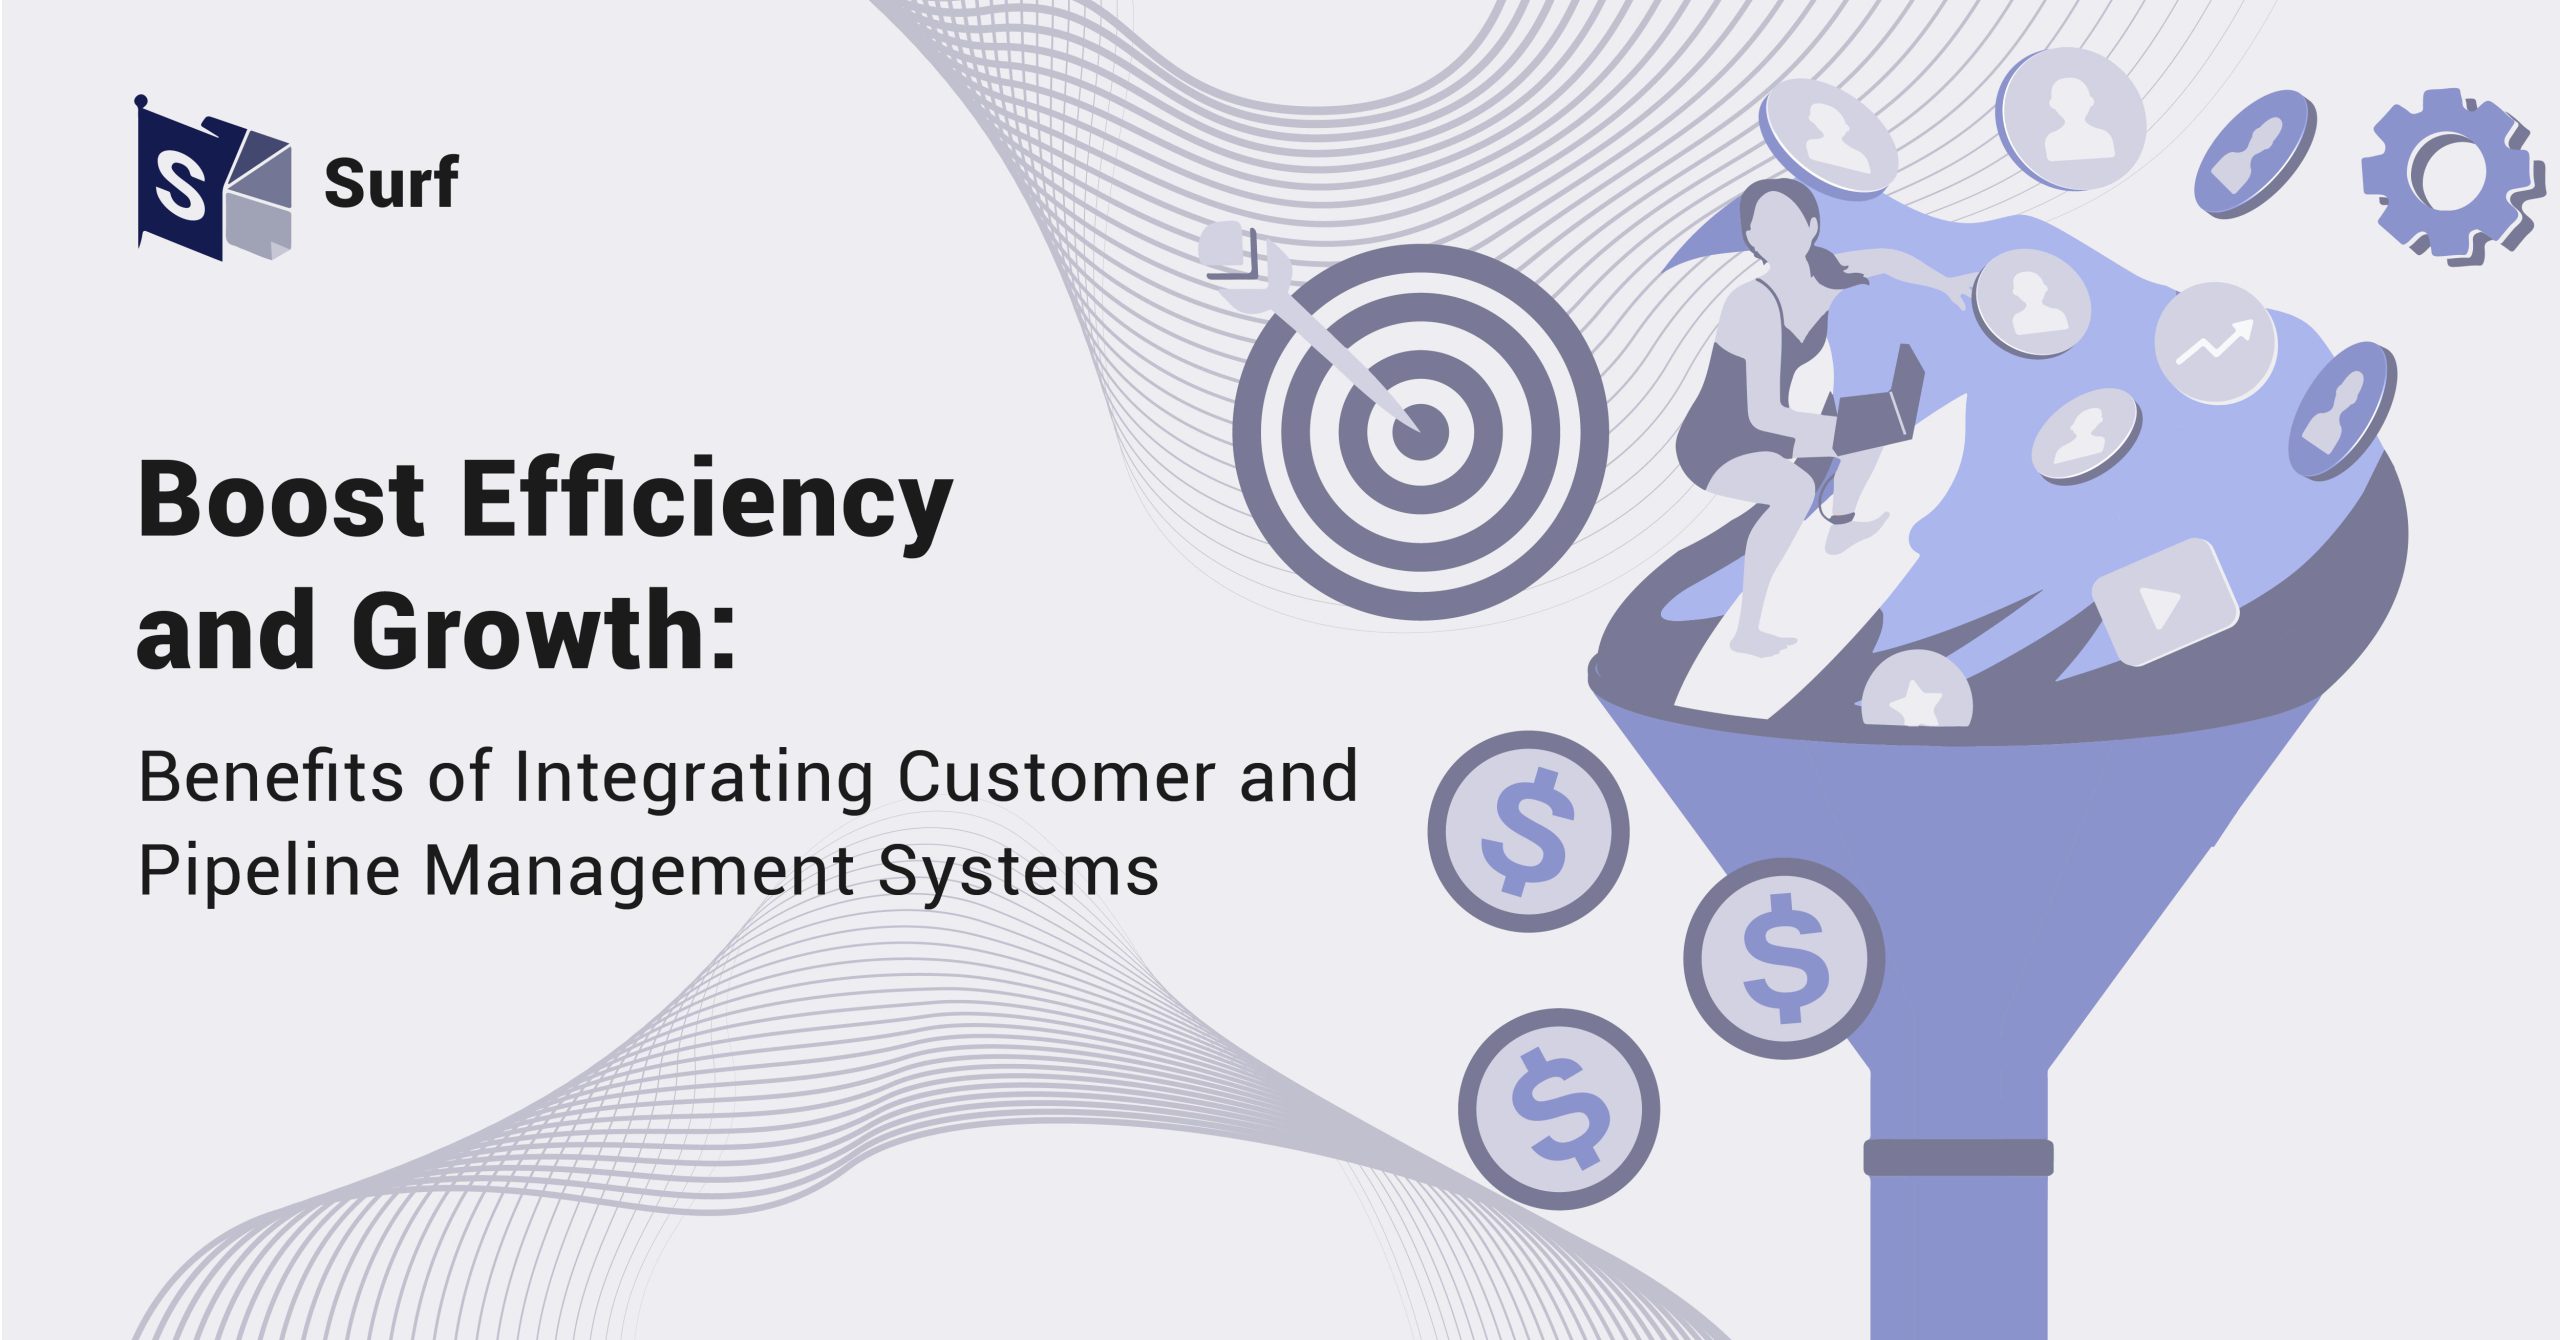 Boost Efficiency and Growth: Benefits of Integrating Customer and Pipeline Management Systems